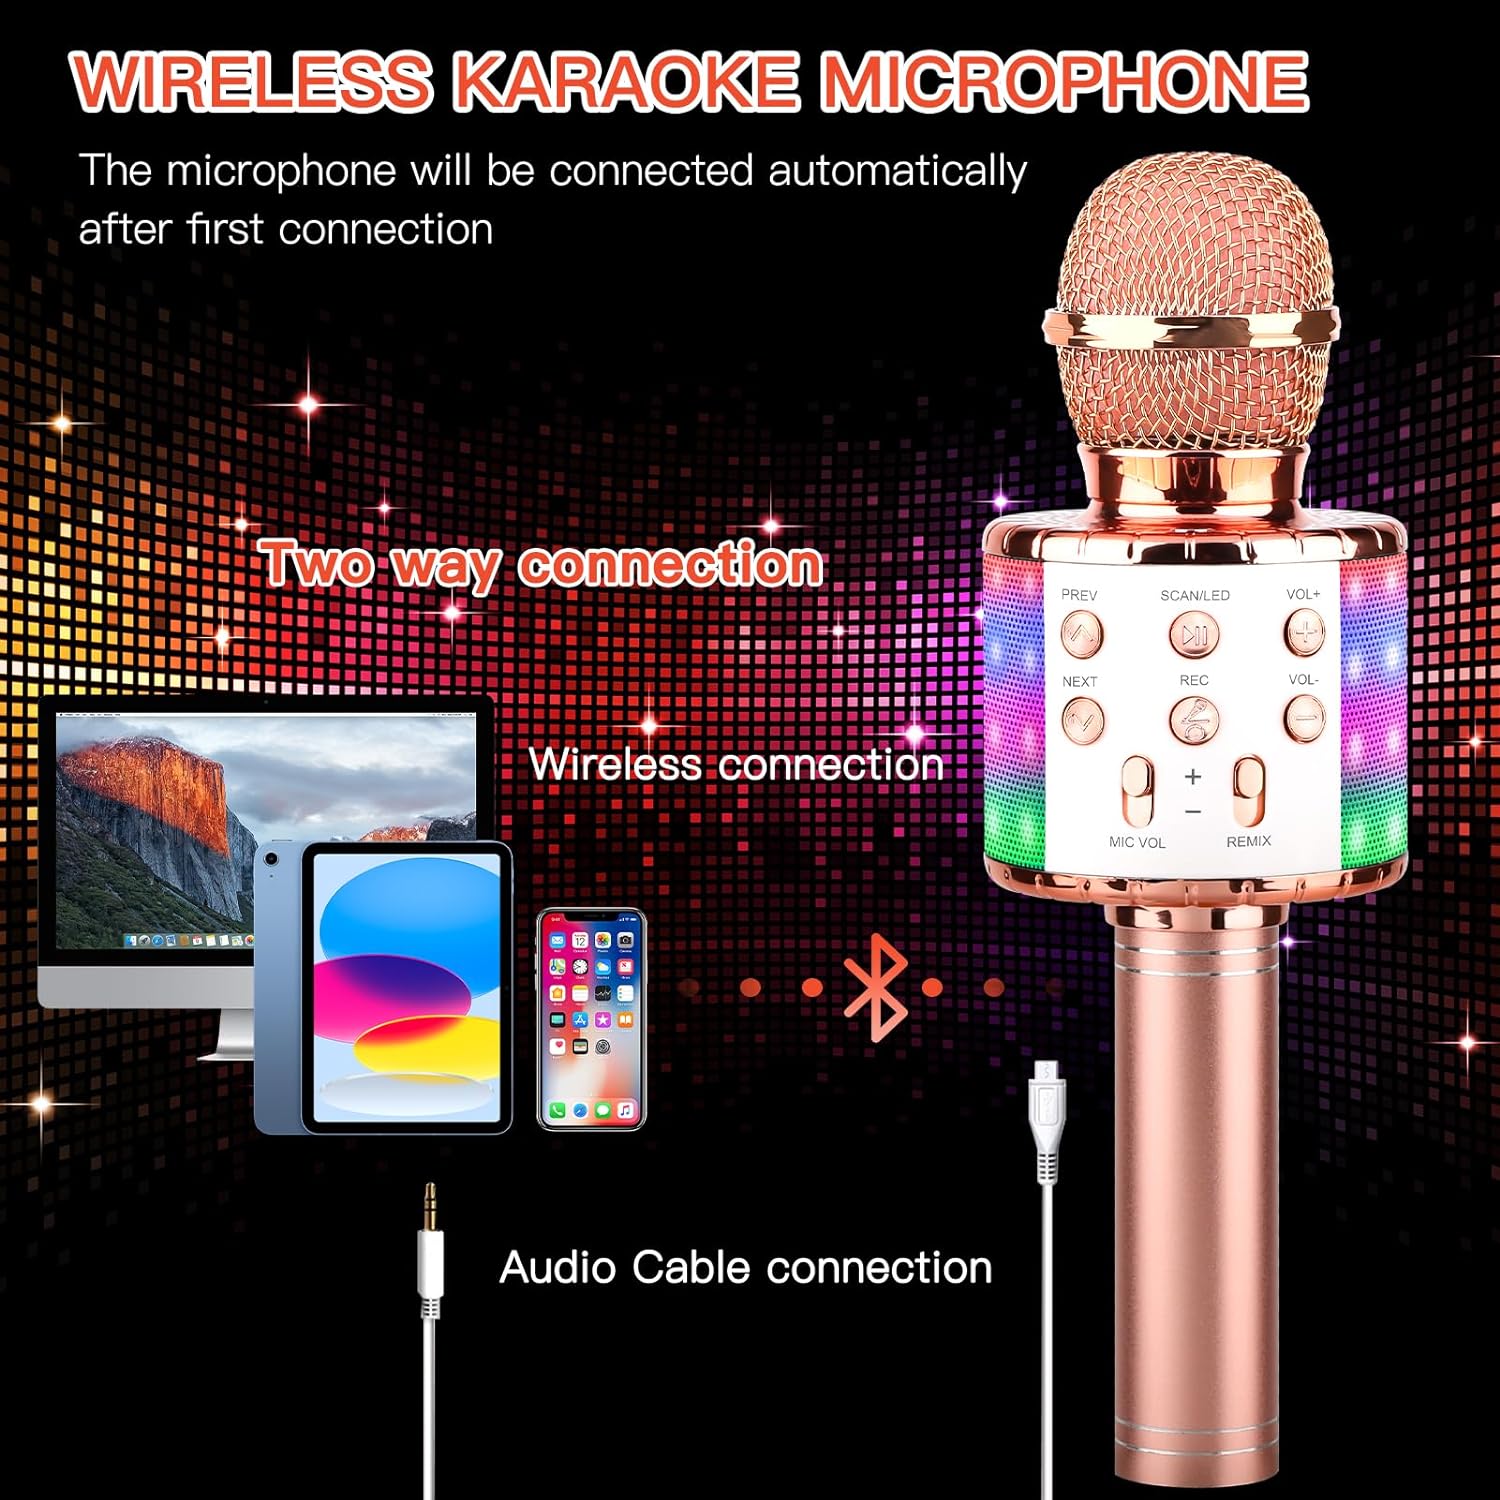 ShinePick Wireless 4 in 1 Bluetooth Karaoke Microphone, Handheld Portable Speaker Machine, Home KTV Player with Record Function, Compatible with Android & iOS Devices(Pink)